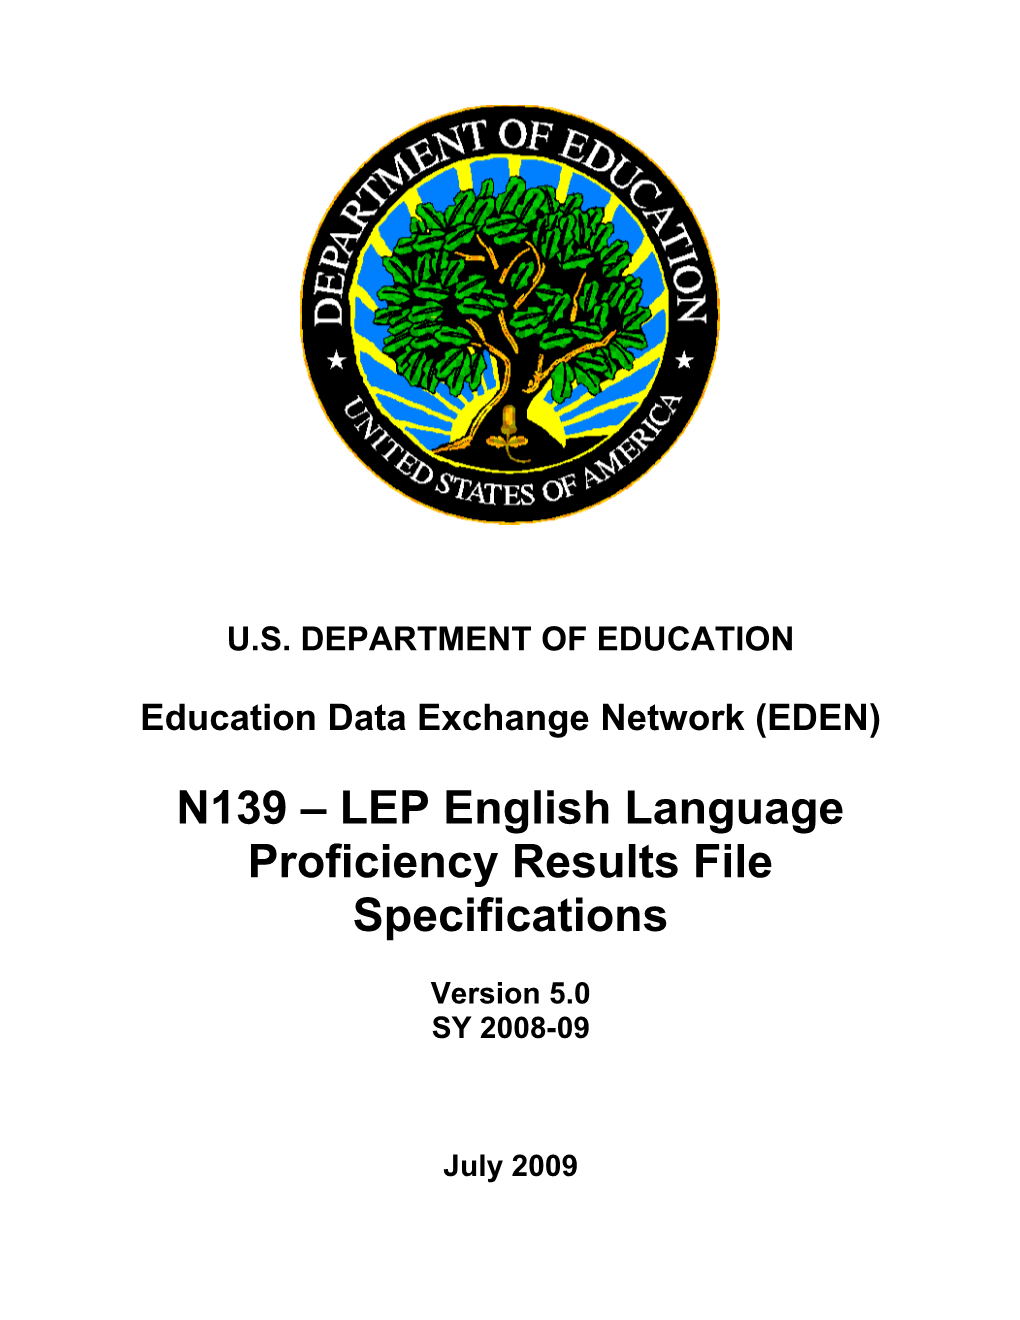 N139 LEP English Language Proficiency Results File Specifications (MS Word)